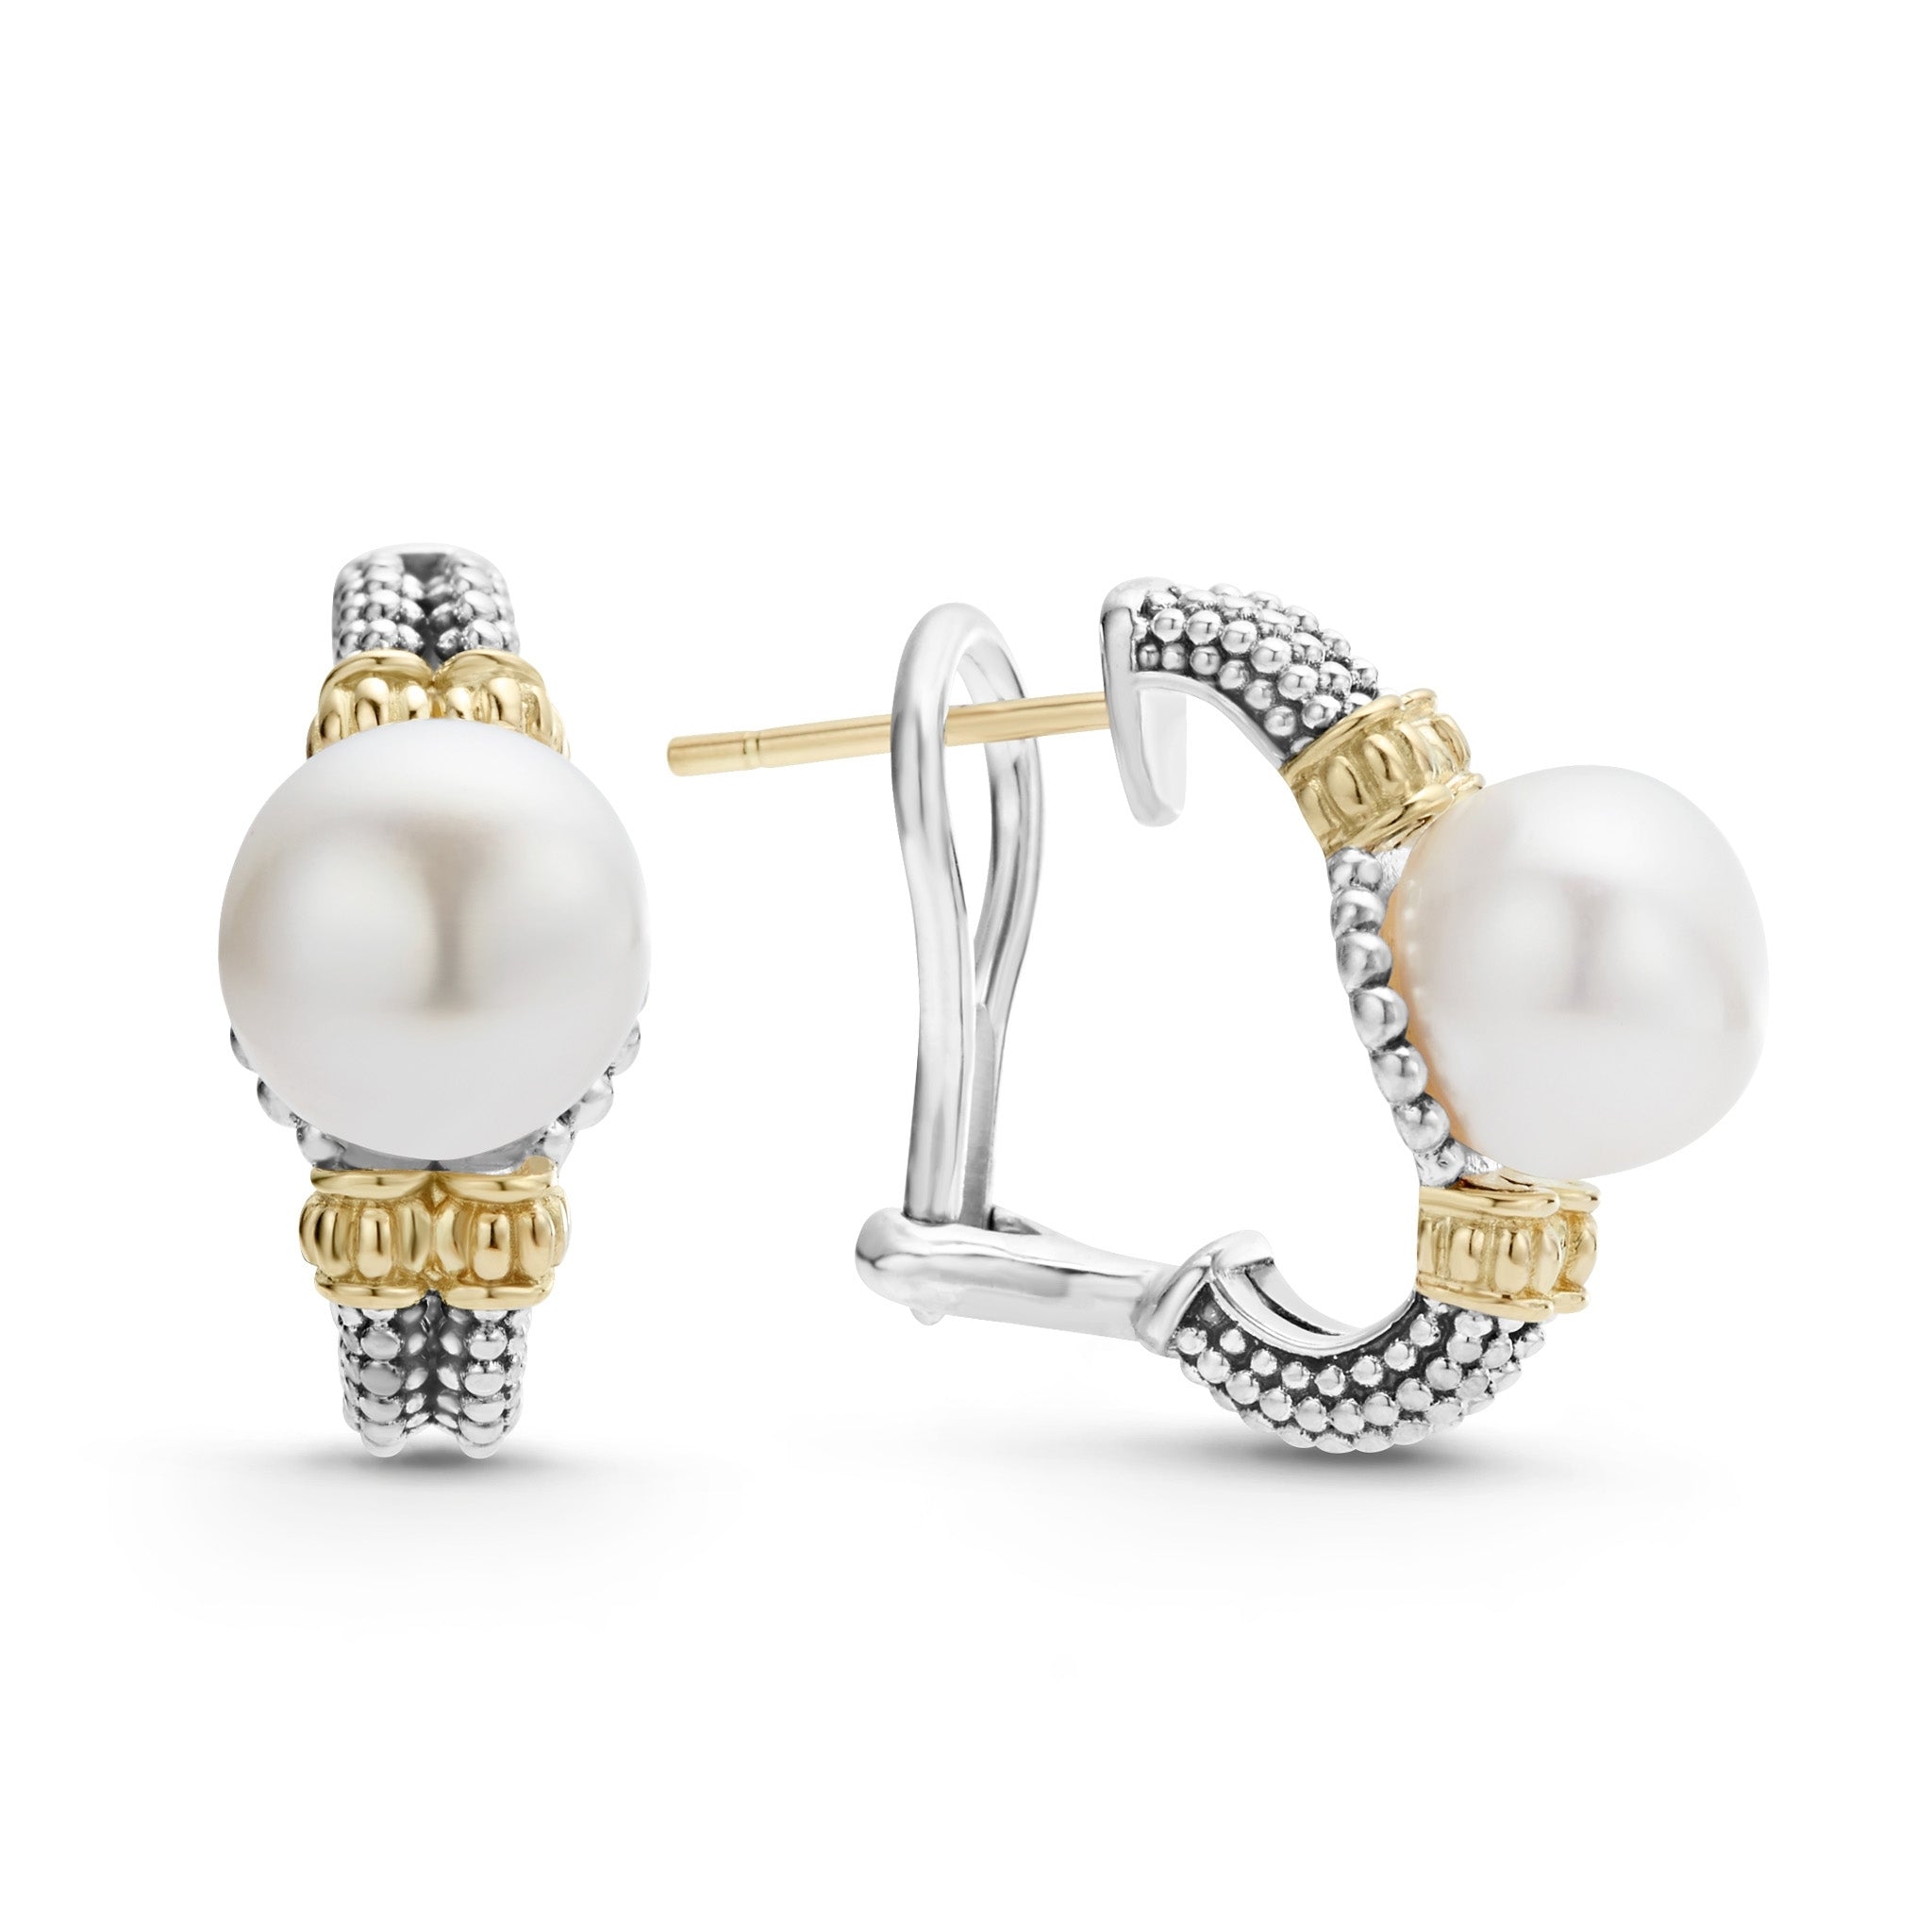 Buy Peacock Design white Pearl Earrings Metal Gold Plated and Pearl Peacock  Jhumki Large Fashion Earrings Studs for Women & Girls. Traditional Temple  Jewellery Antique design Peacock Pearl based Earrings at Amazon.in